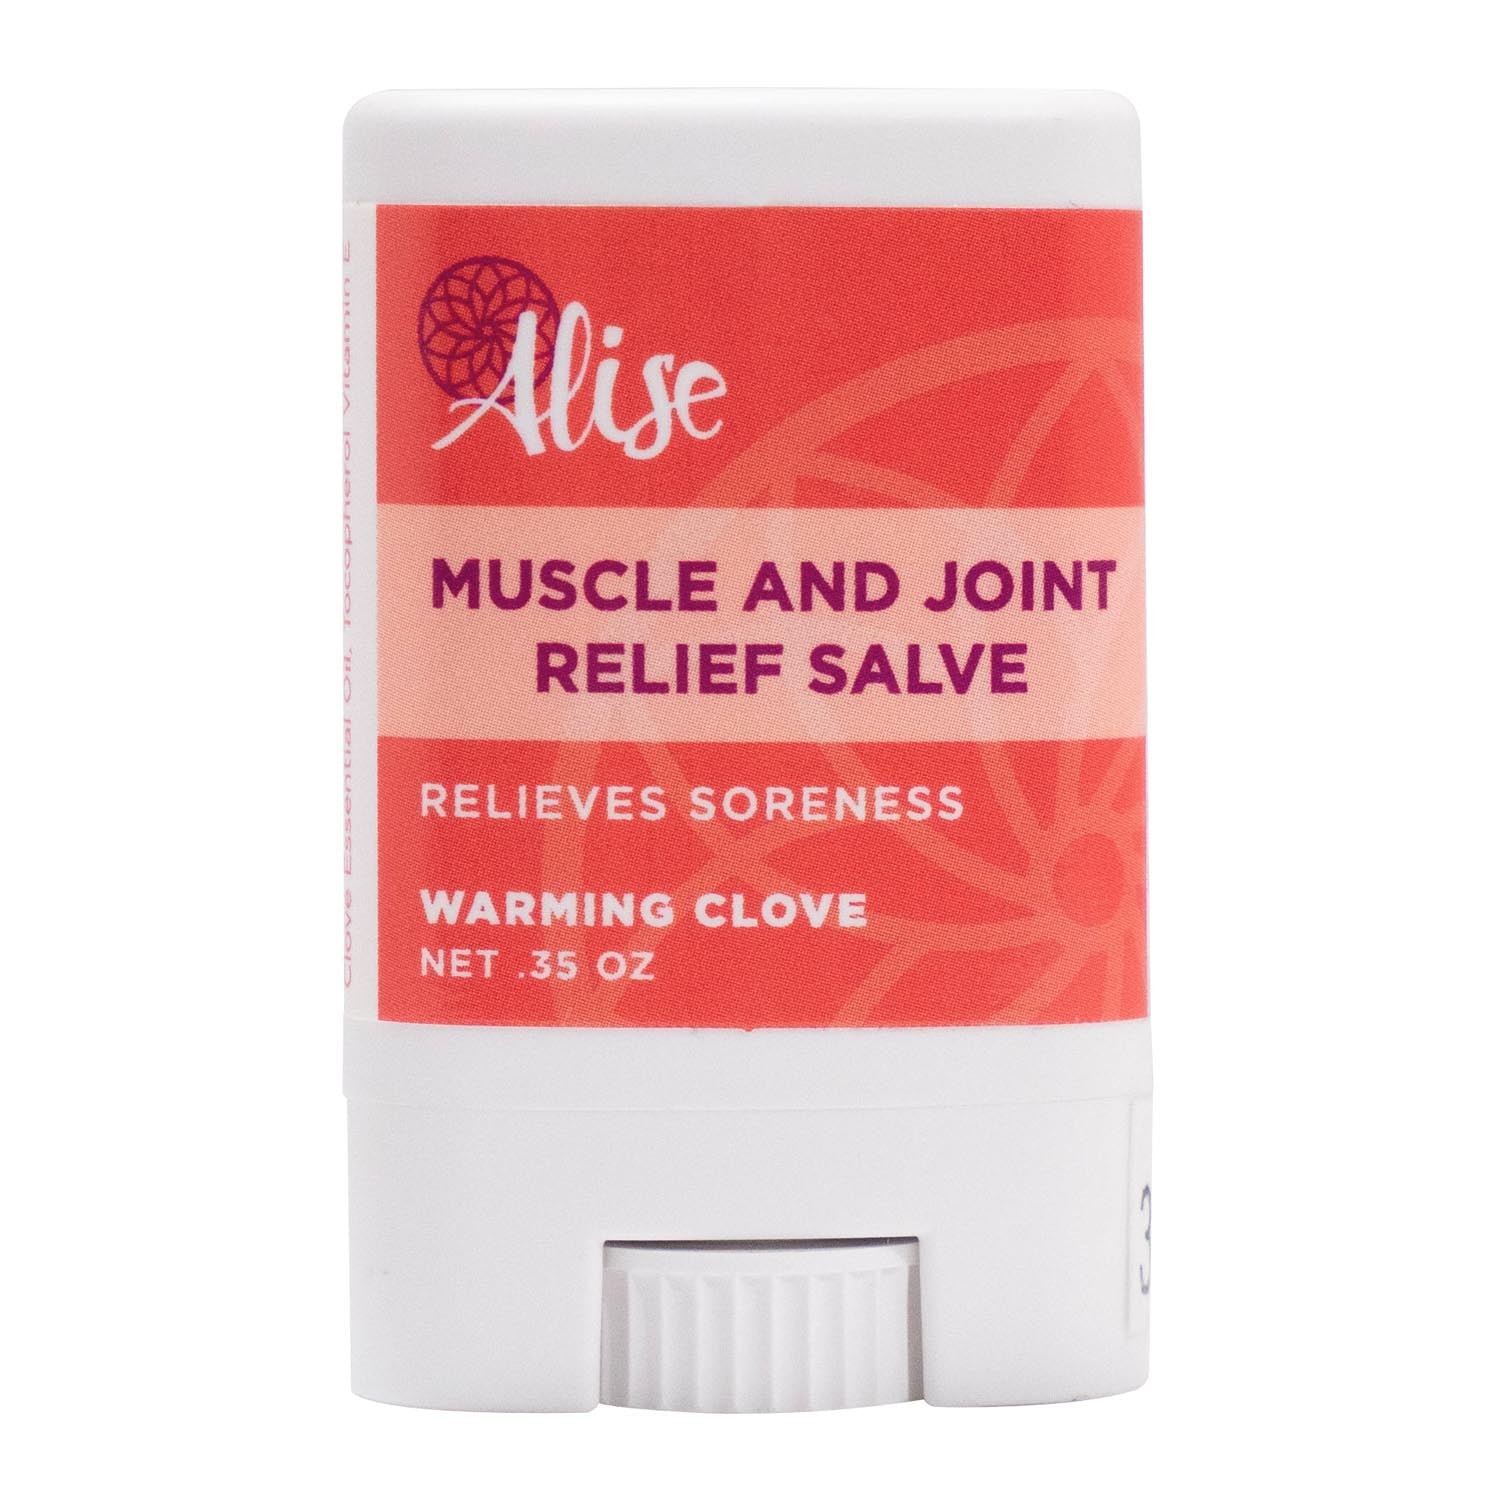 Muscle and Joint Relief Salve Warming Clove .35oz Rub On handcrafted by Alise Body Care